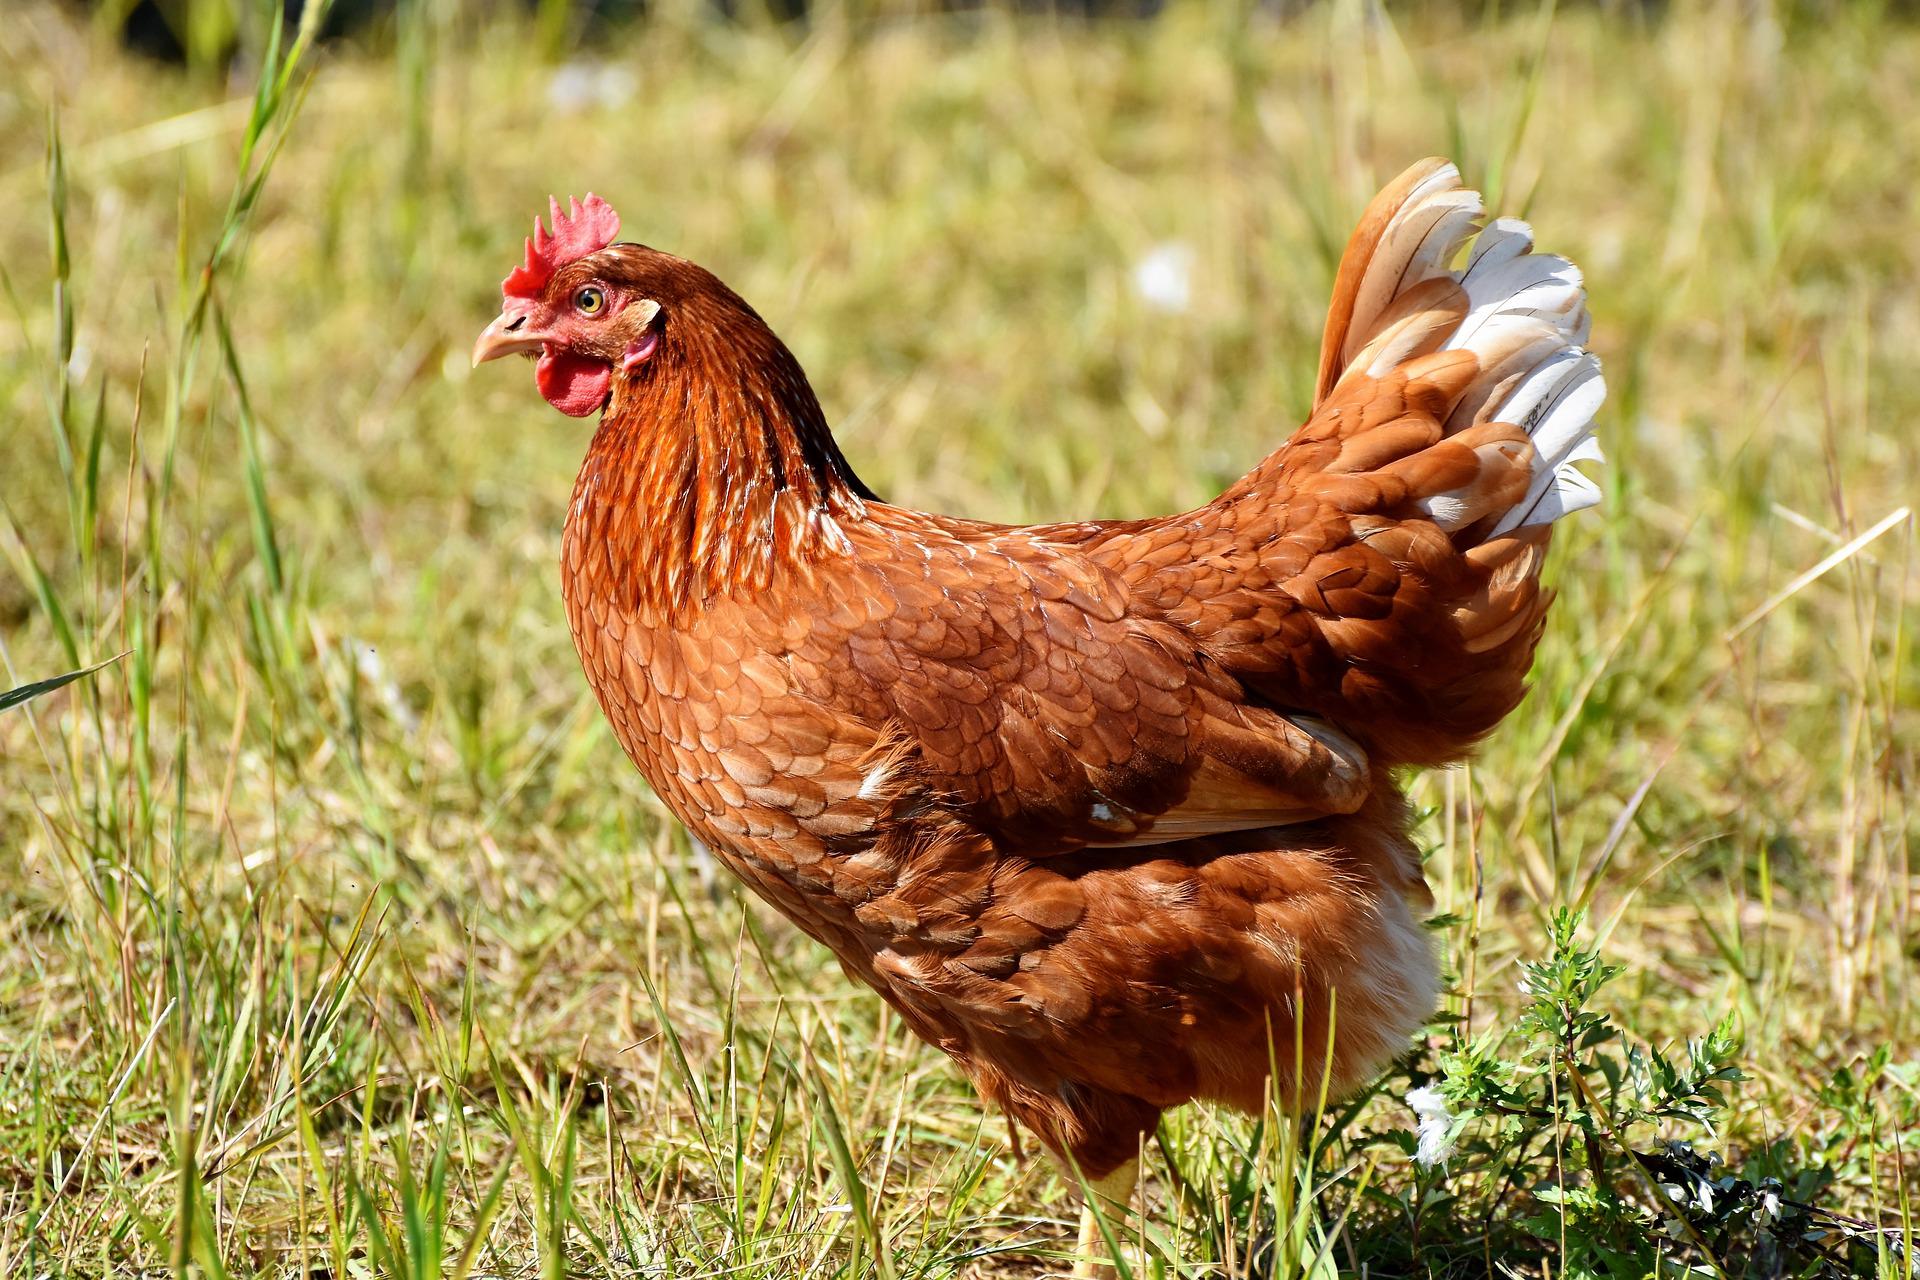 When Do Chickens Start Laying Eggs and How To Help Them Start